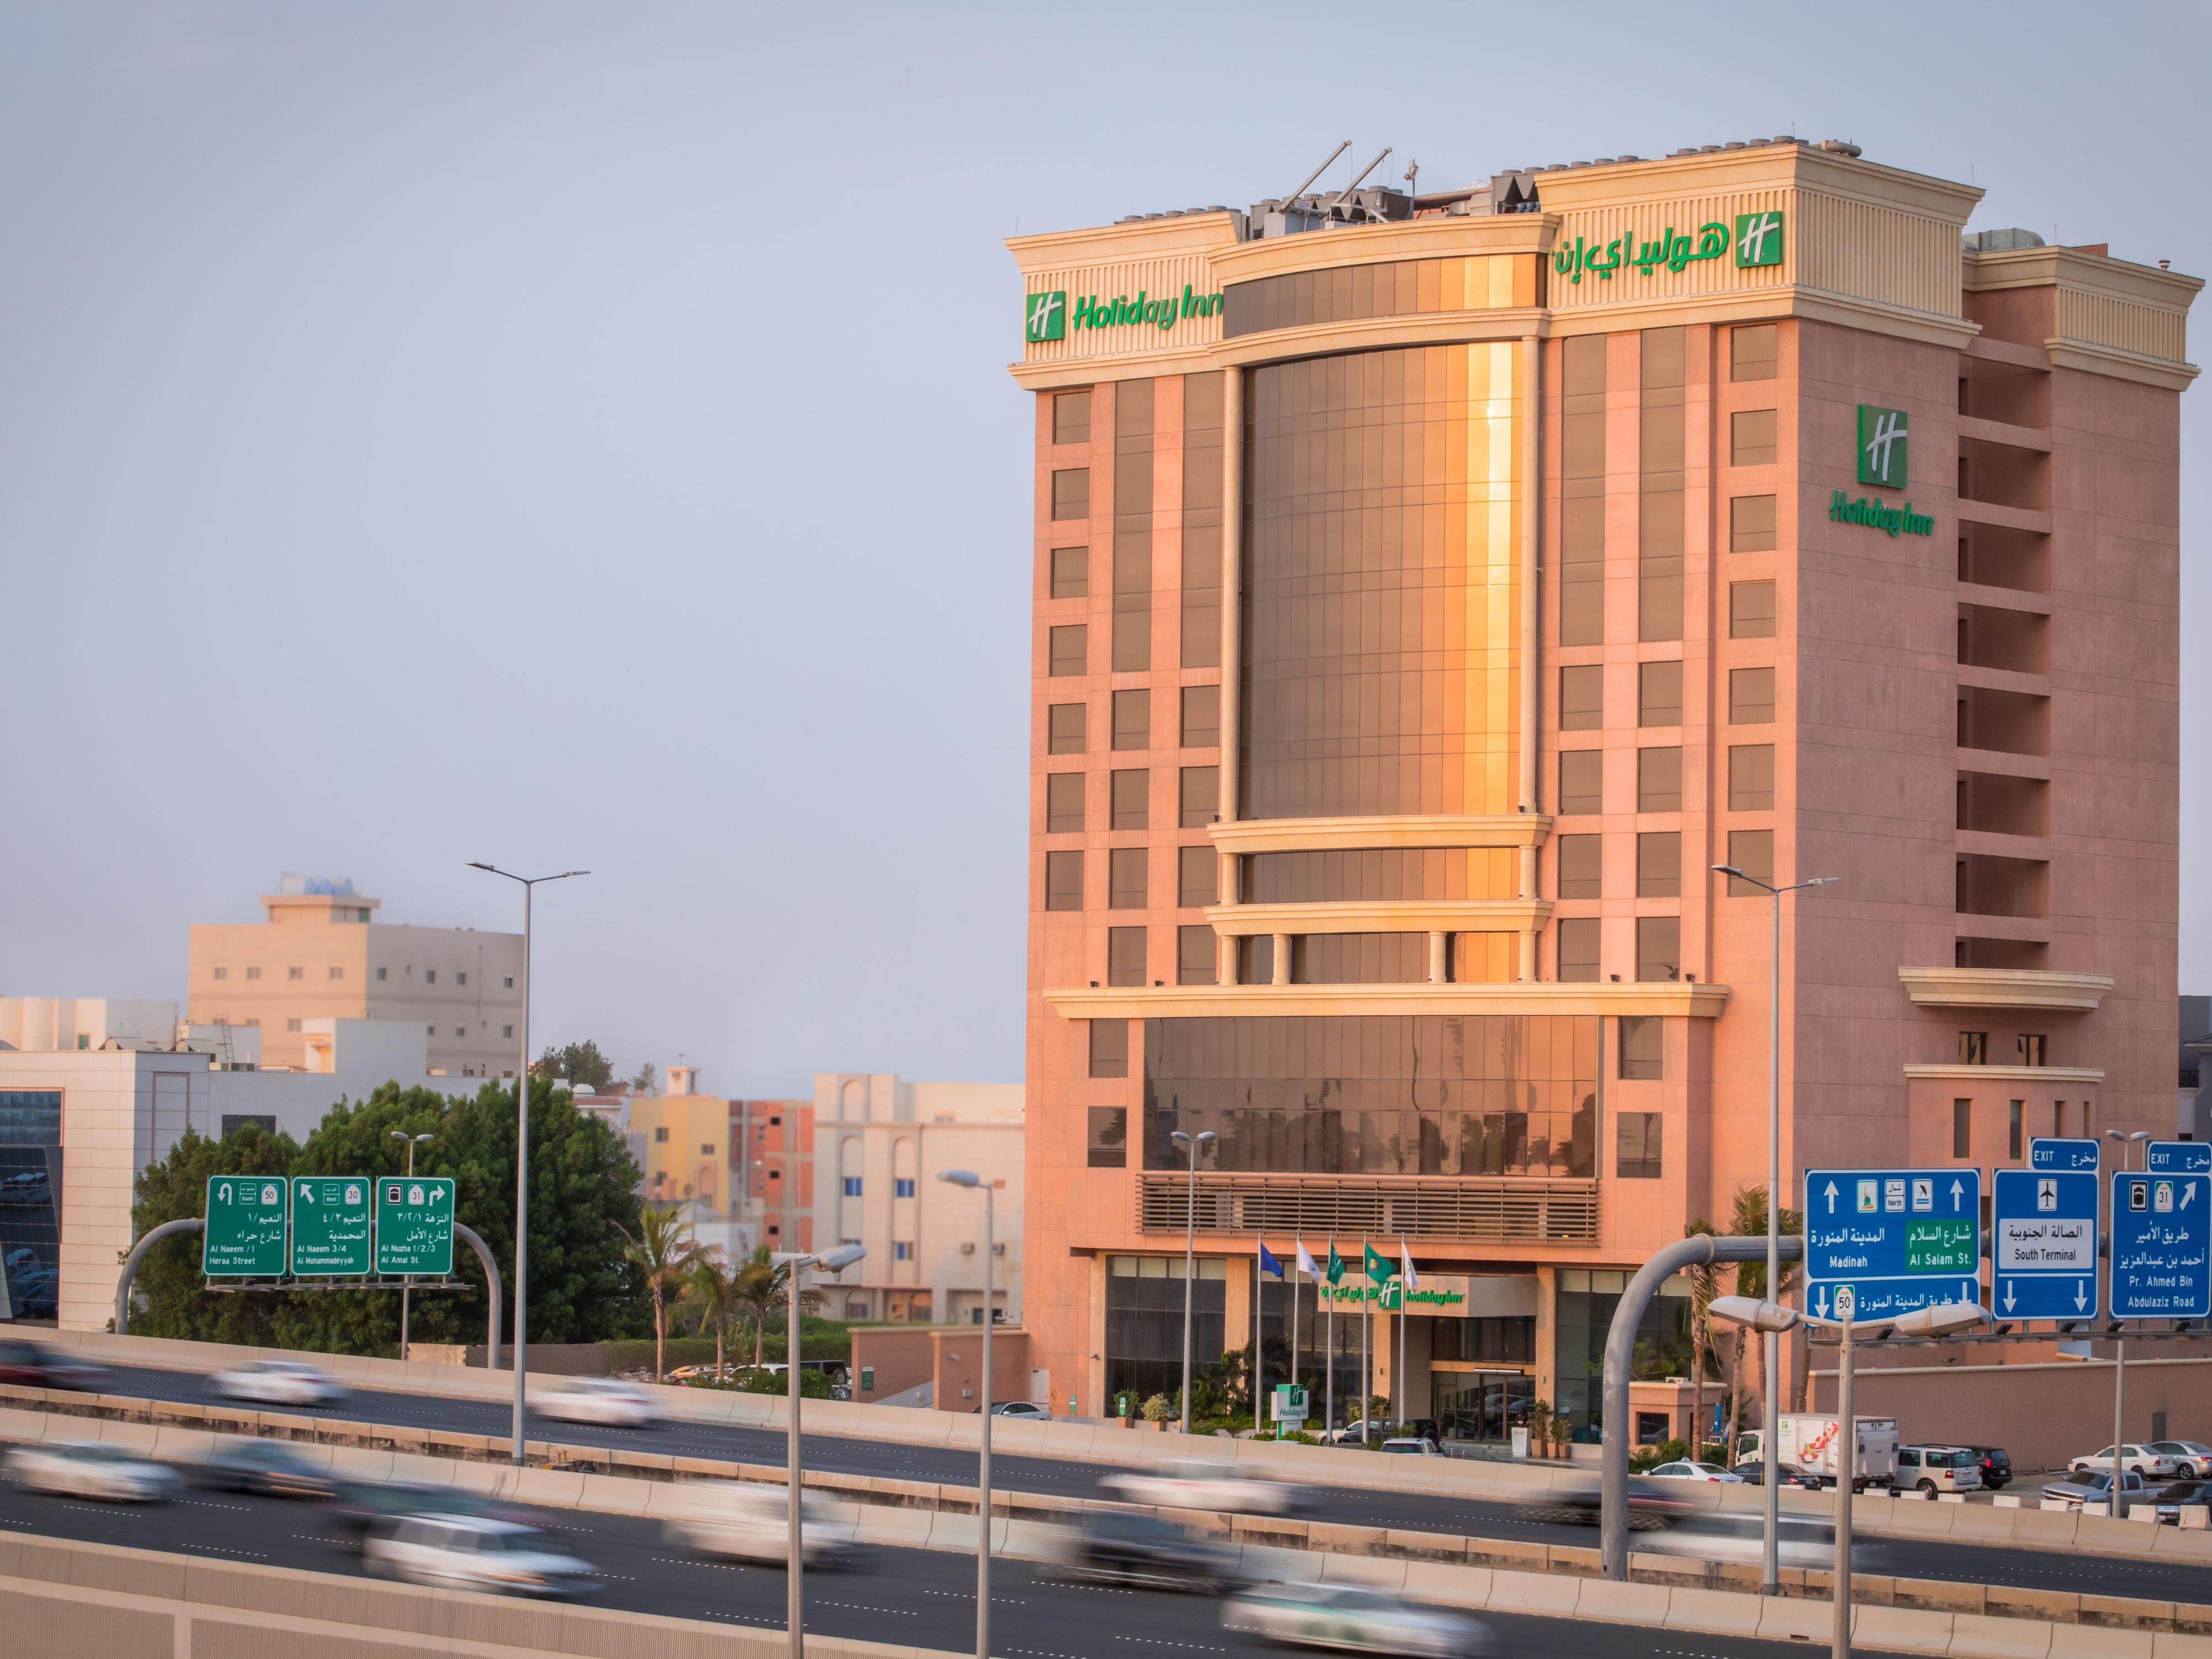 Work and play rarely mix well – except at Holiday Inn Jeddah Gateway, where our goal is the guest's relaxation and pleasure at every stay! Conveniently located along Al Madinah Road, less than a 10-minute drive from King Abdul Aziz International Airport, and within walking distance of the famed Jeddah Exhibition Centre and splendid Mall of Arabia.